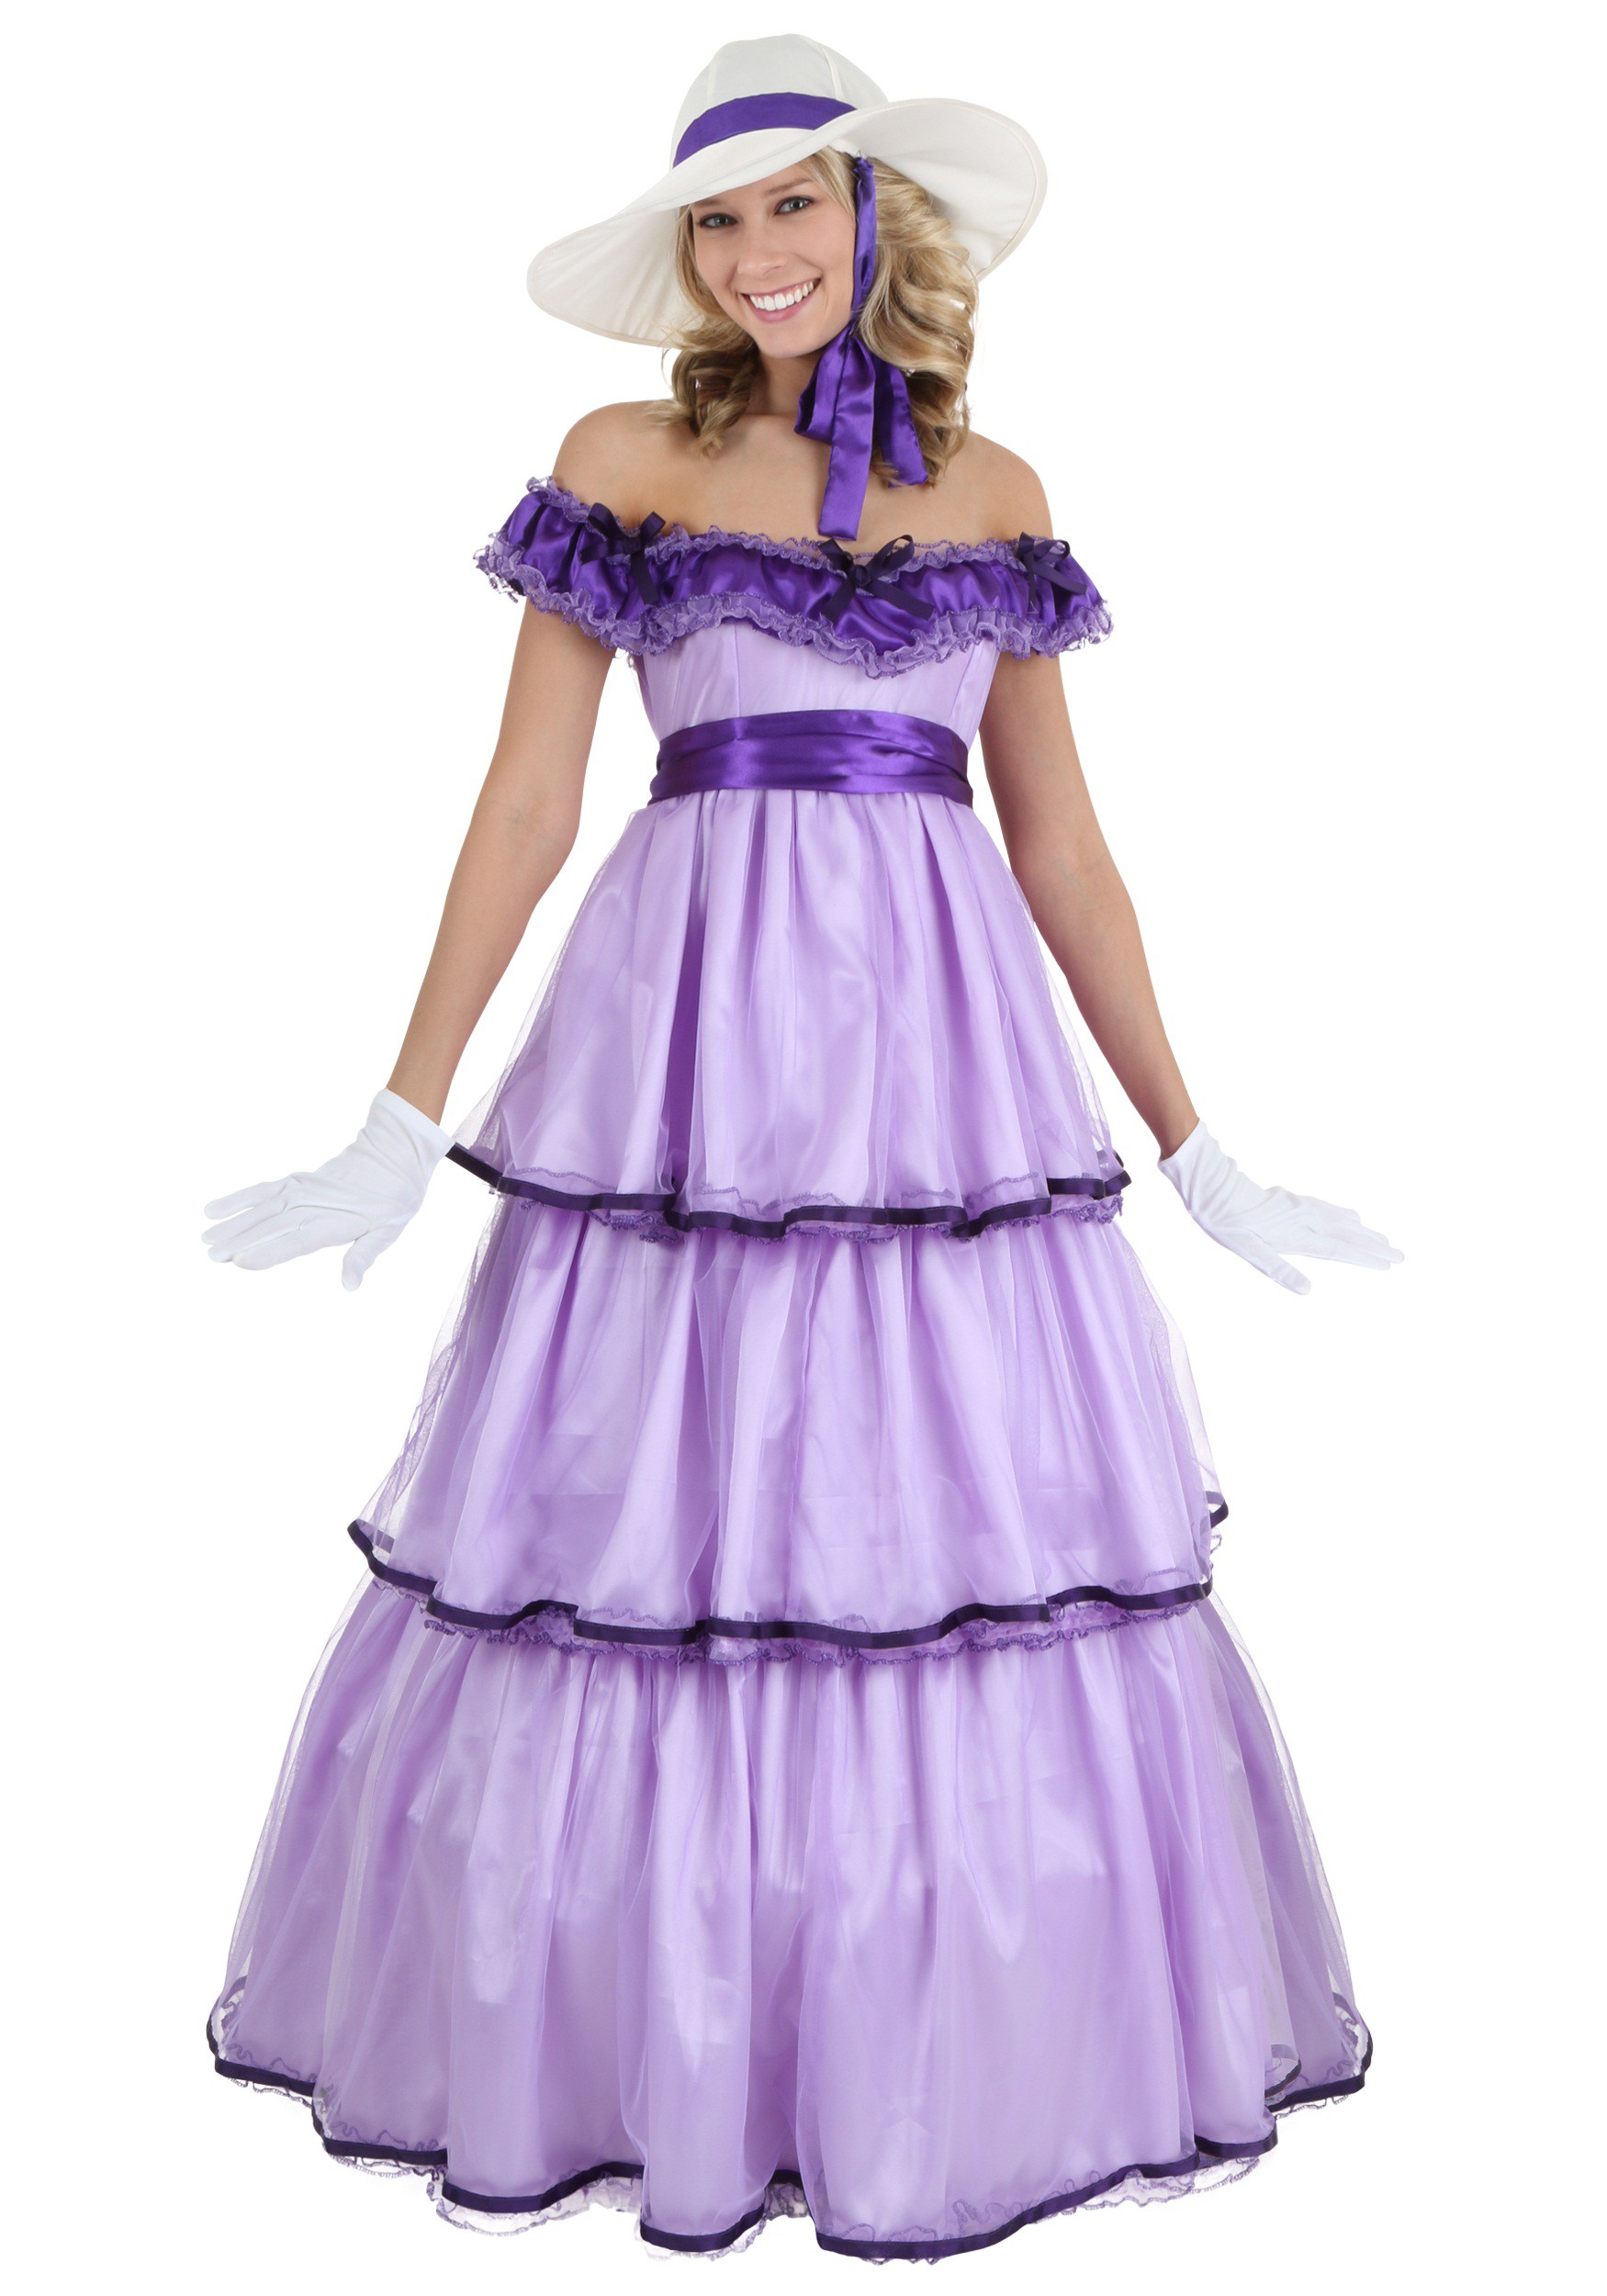 Southern Belle Adult Costume 108